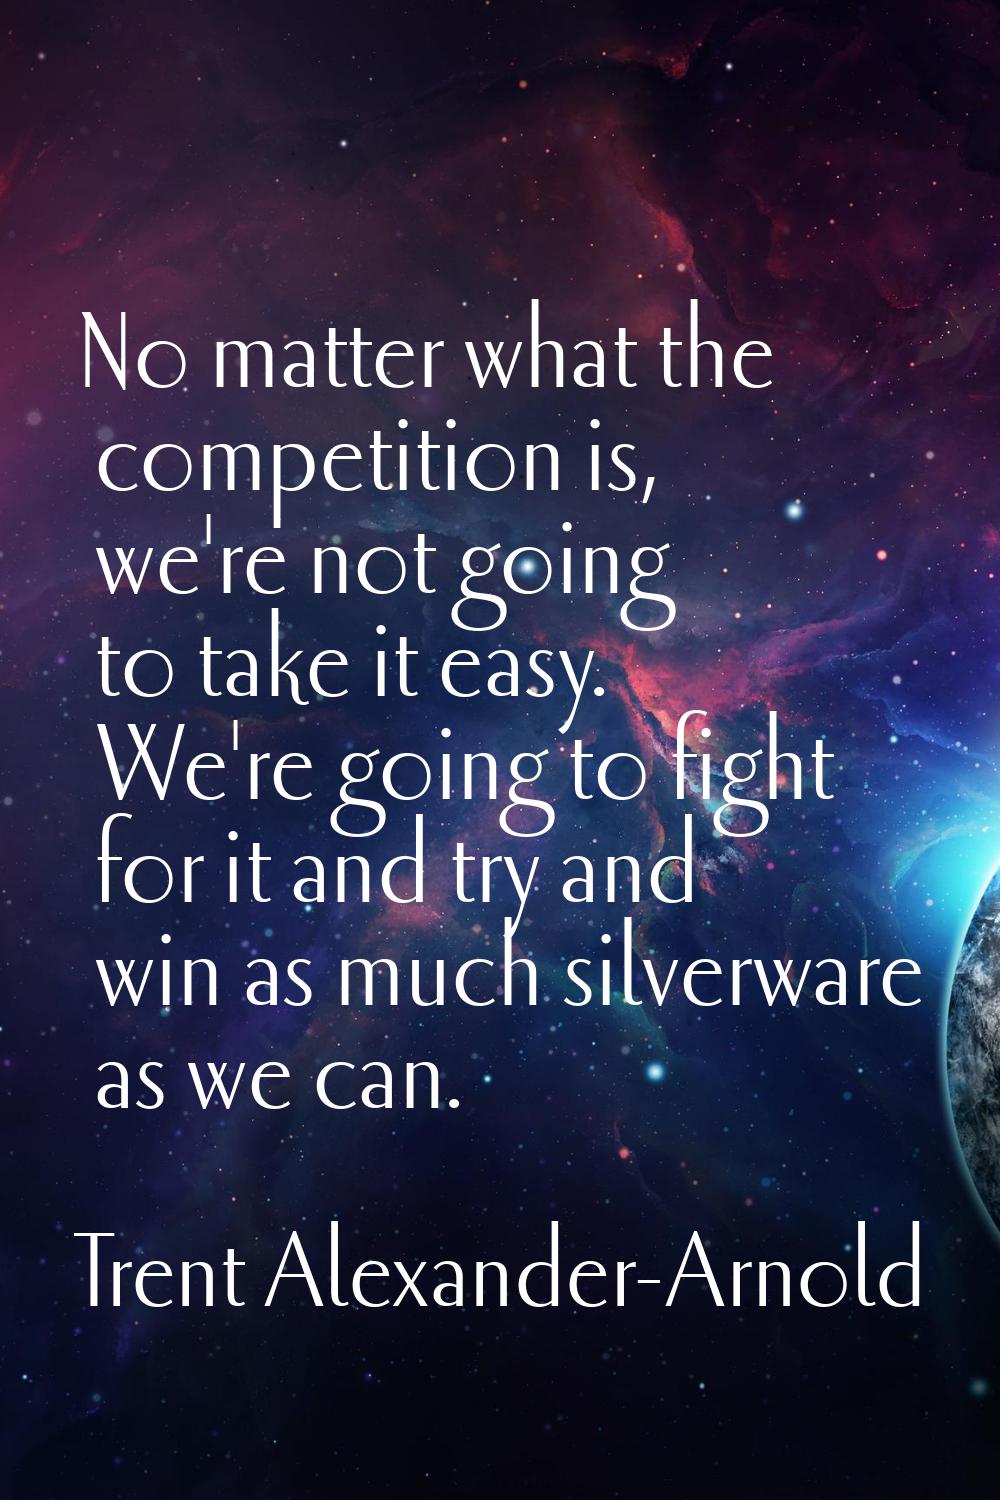 No matter what the competition is, we're not going to take it easy. We're going to fight for it and